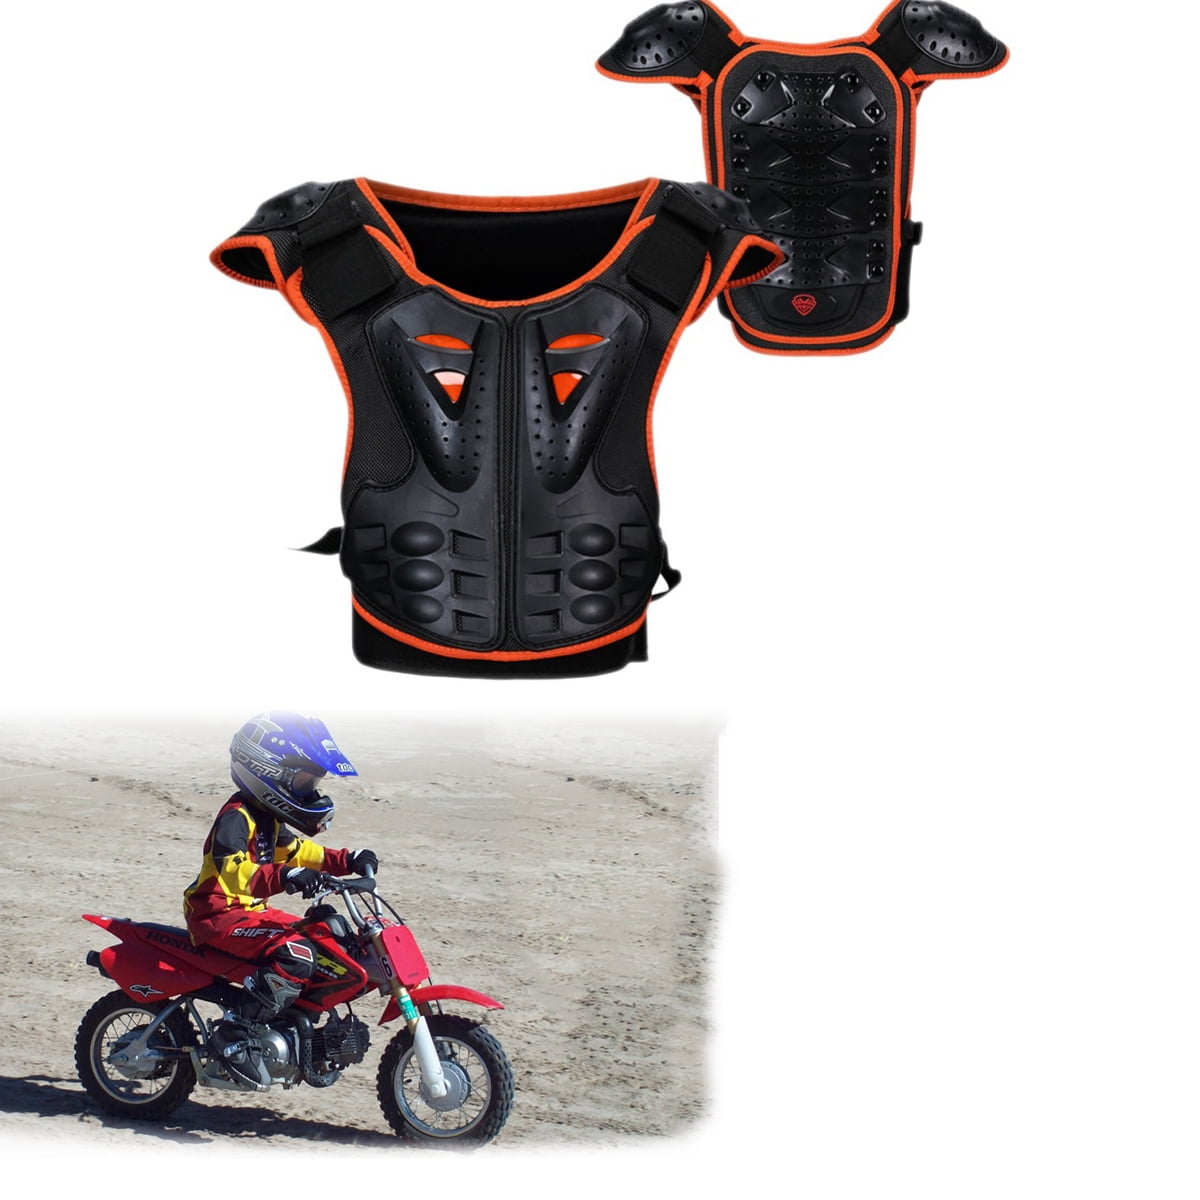 KIDS BODY ARMOUR MOTORBIKE MOTORCYCLE MOTOCROSS CUBS SPINE GUARD CE PROTECT SUIT 